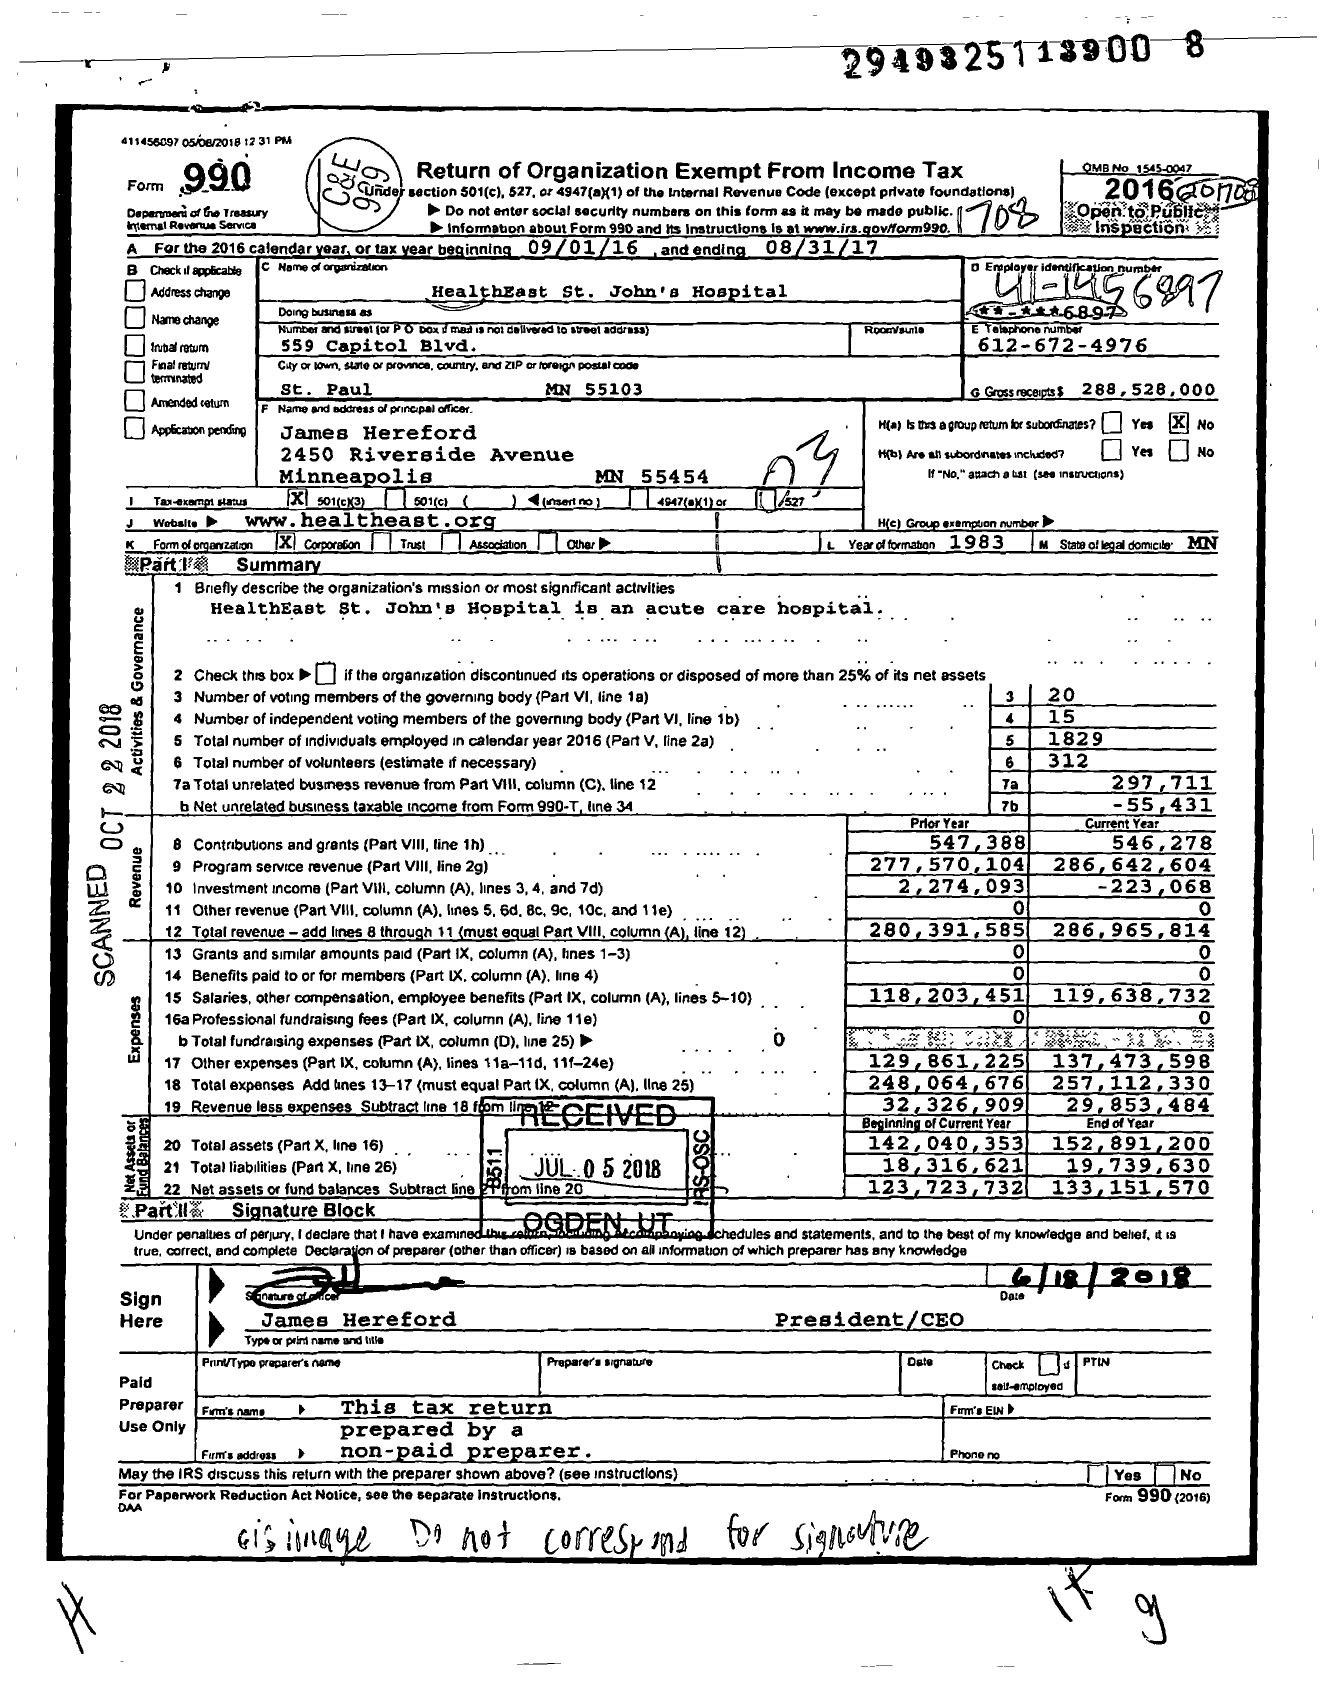 Image of first page of 2016 Form 990 for Healtheast St. John's Hospital